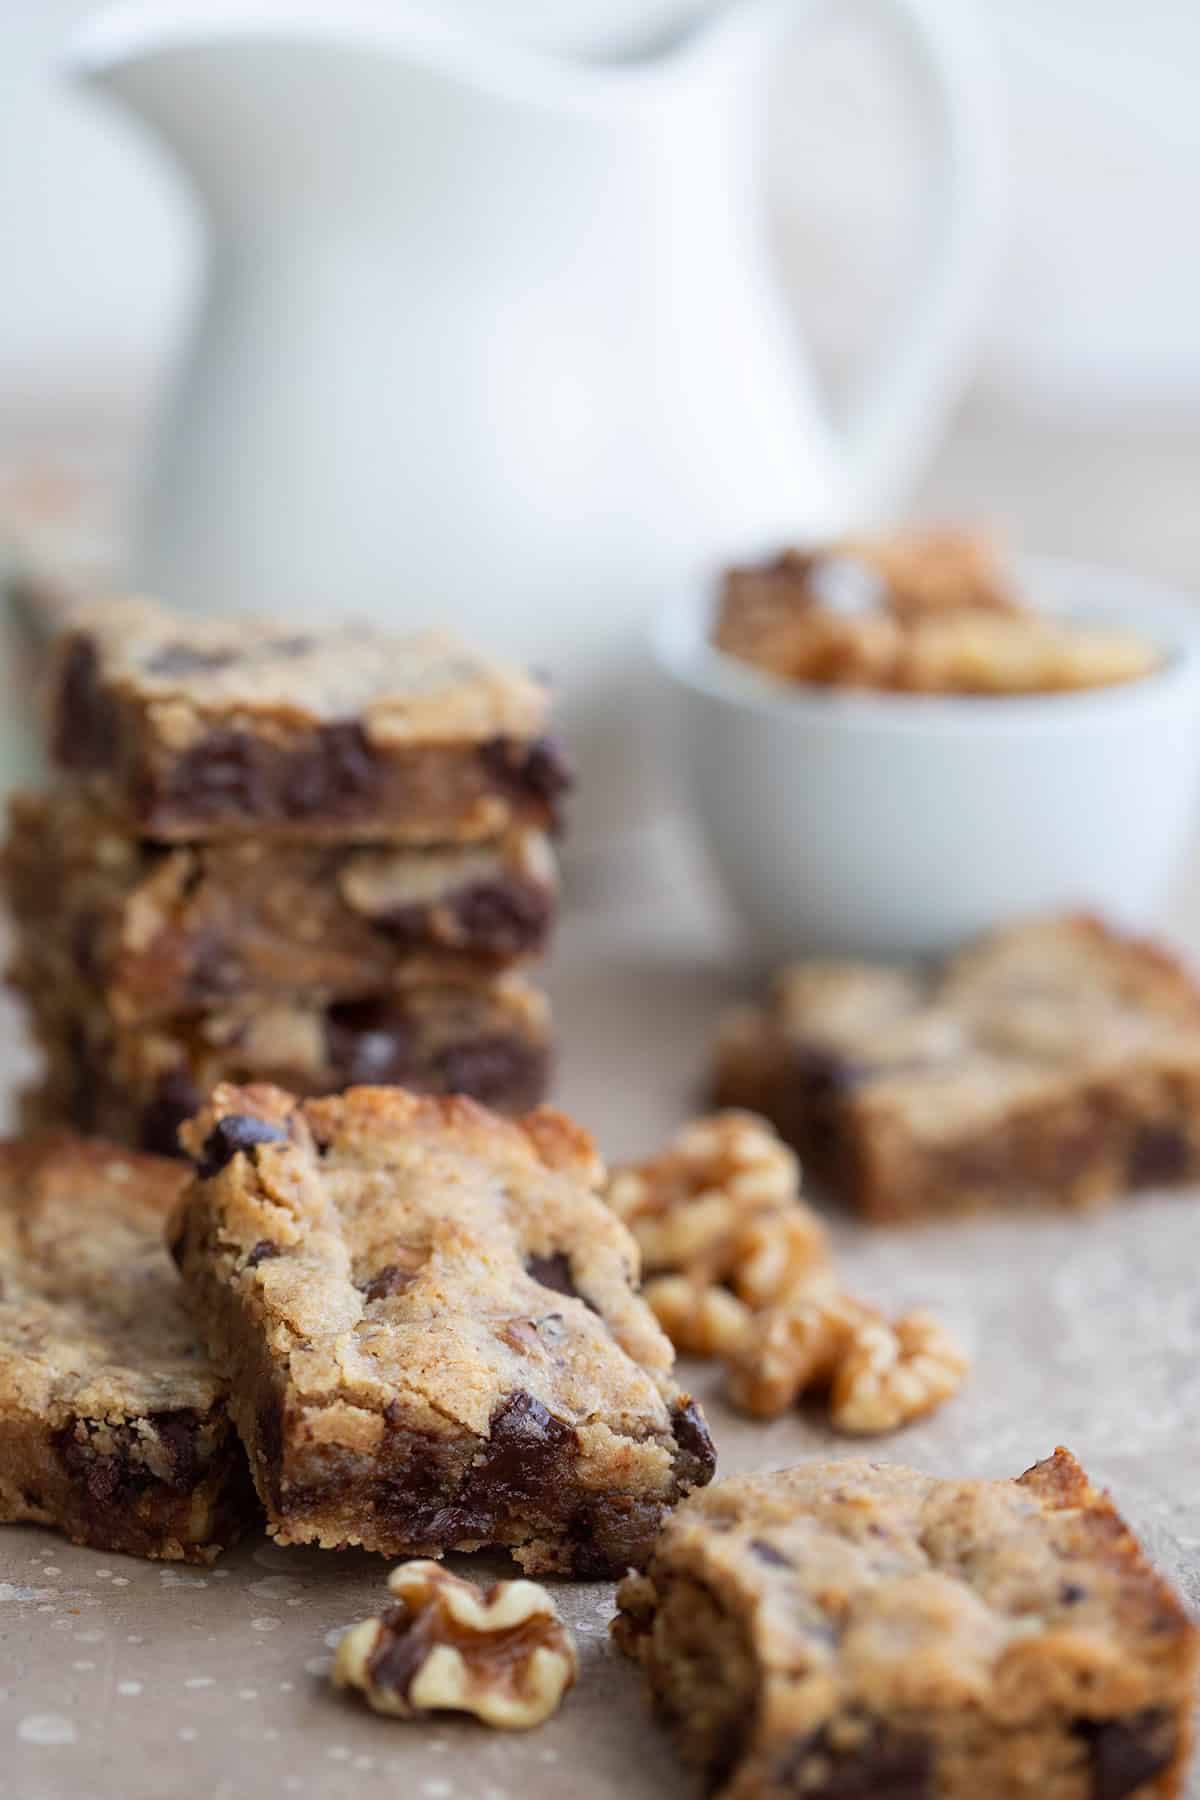 Walnut blondies and walnuts strewn around a table with a white pitcher in the background.